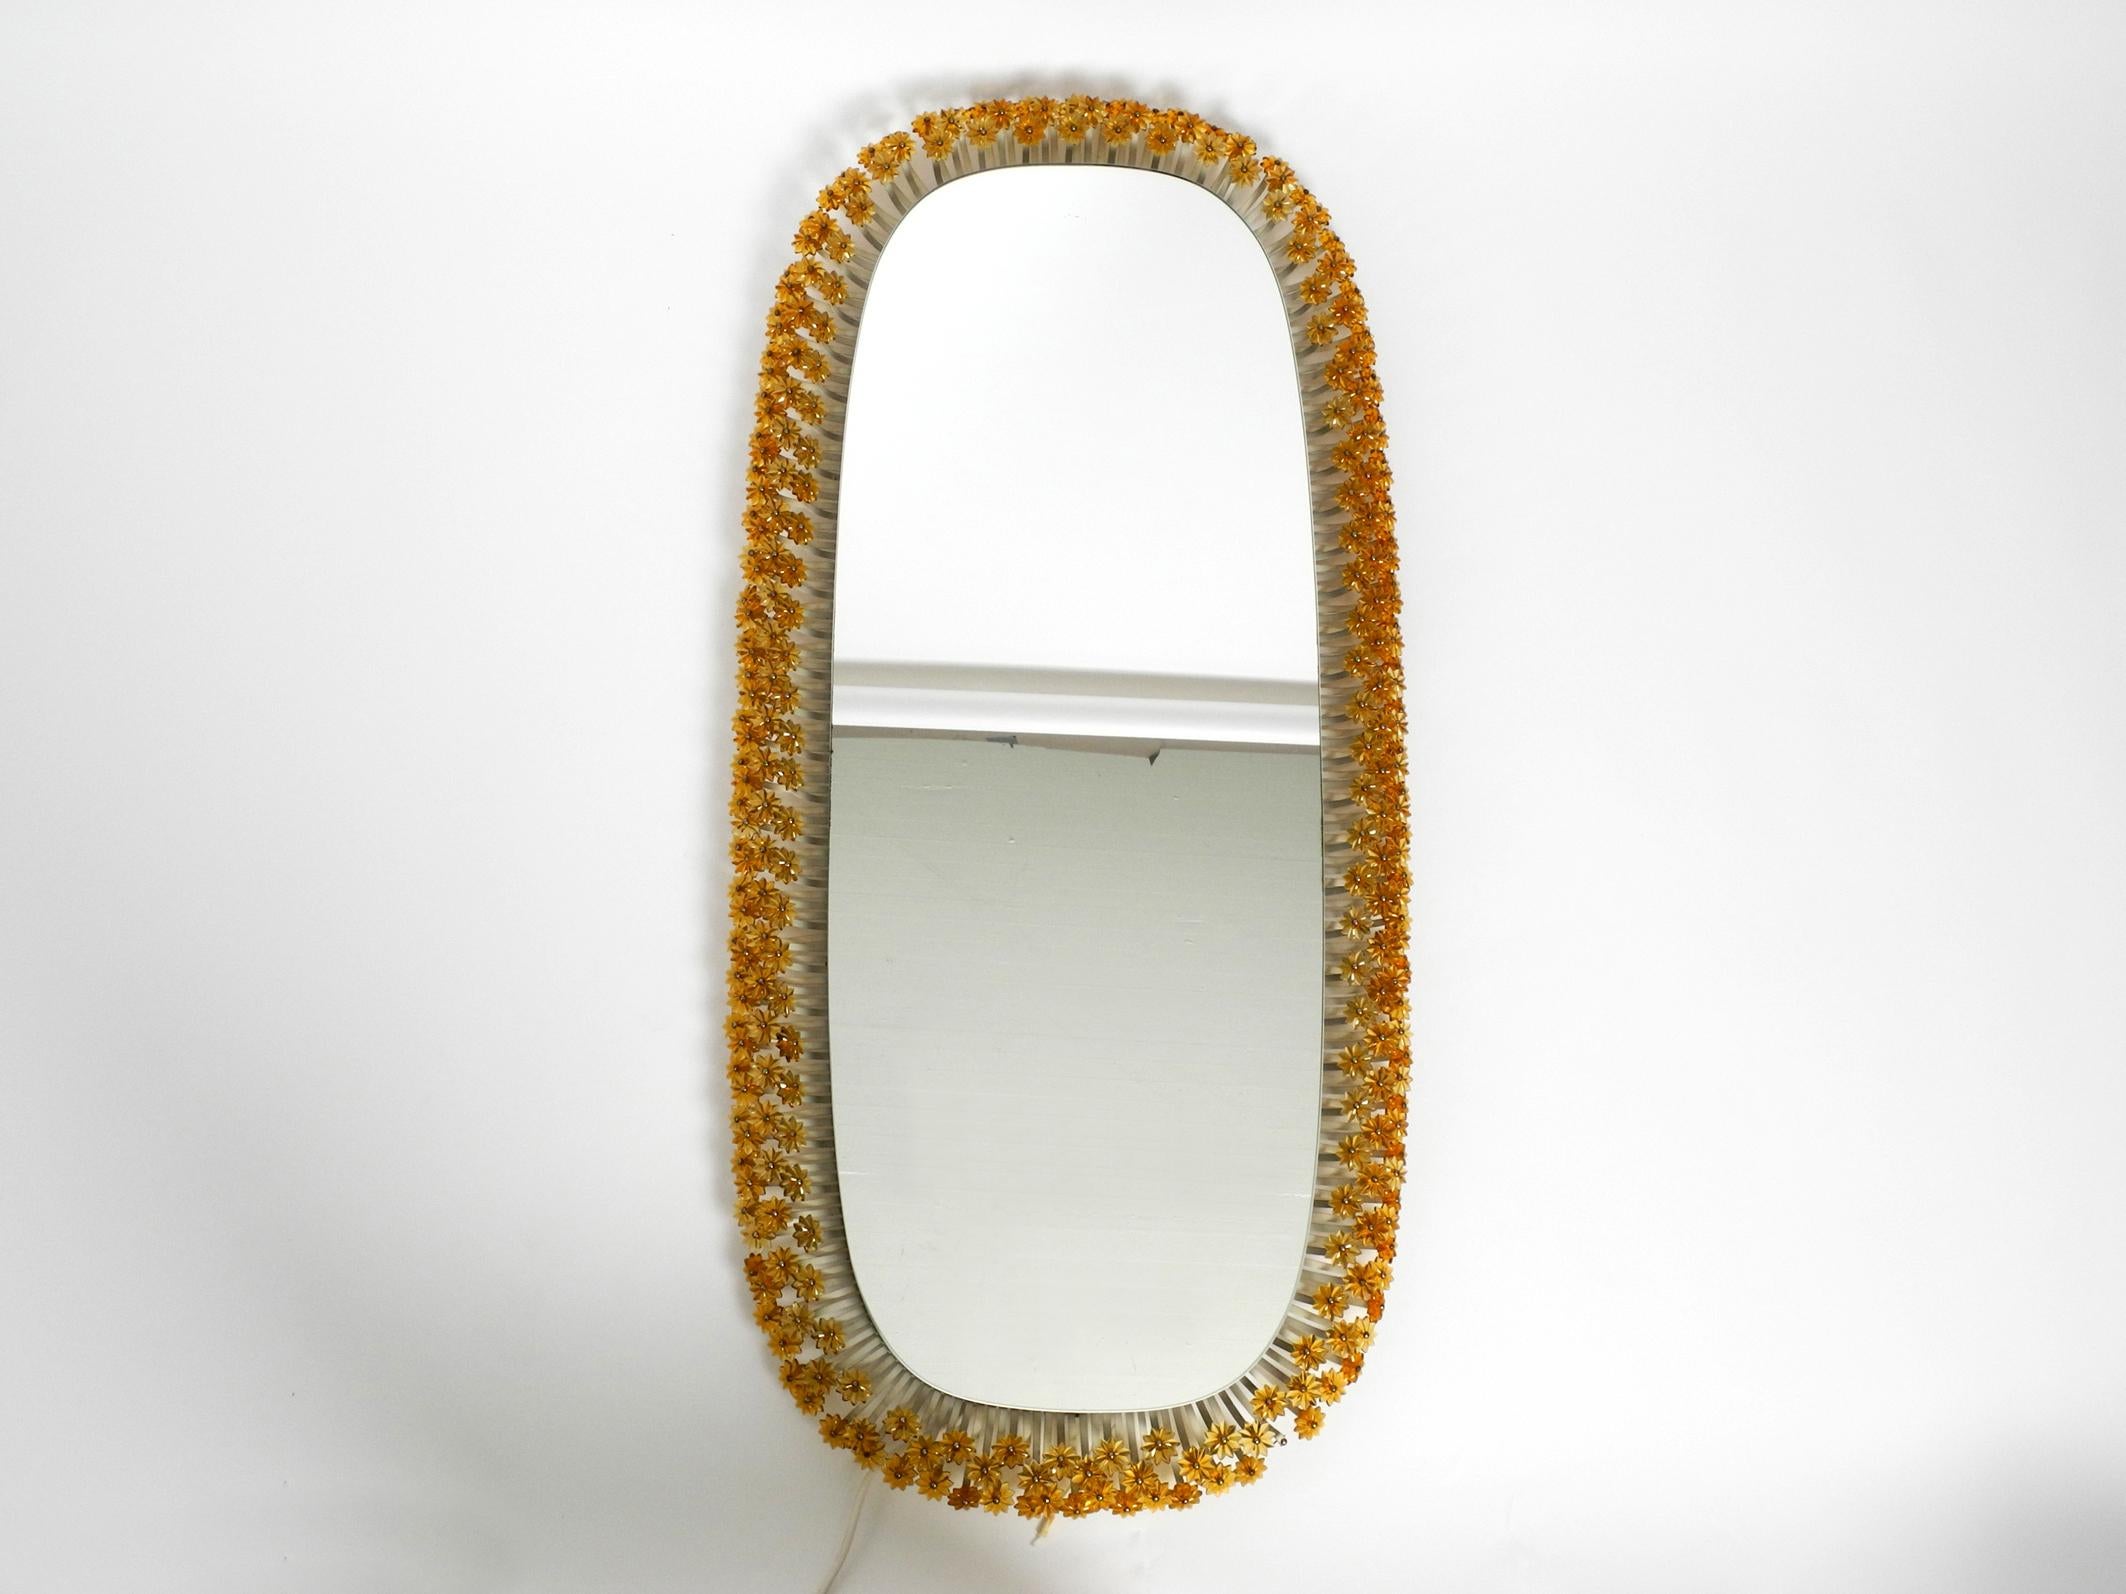 Wonderful rare XXXL backlit Mid-Century Modern flower mirror by Münchner Zier-Form. Manufacturer is Schöninger Spiegel. Made in Germany.
Great elaborate design with many small plastic flowers in amber color. 
The back is made of wood and is